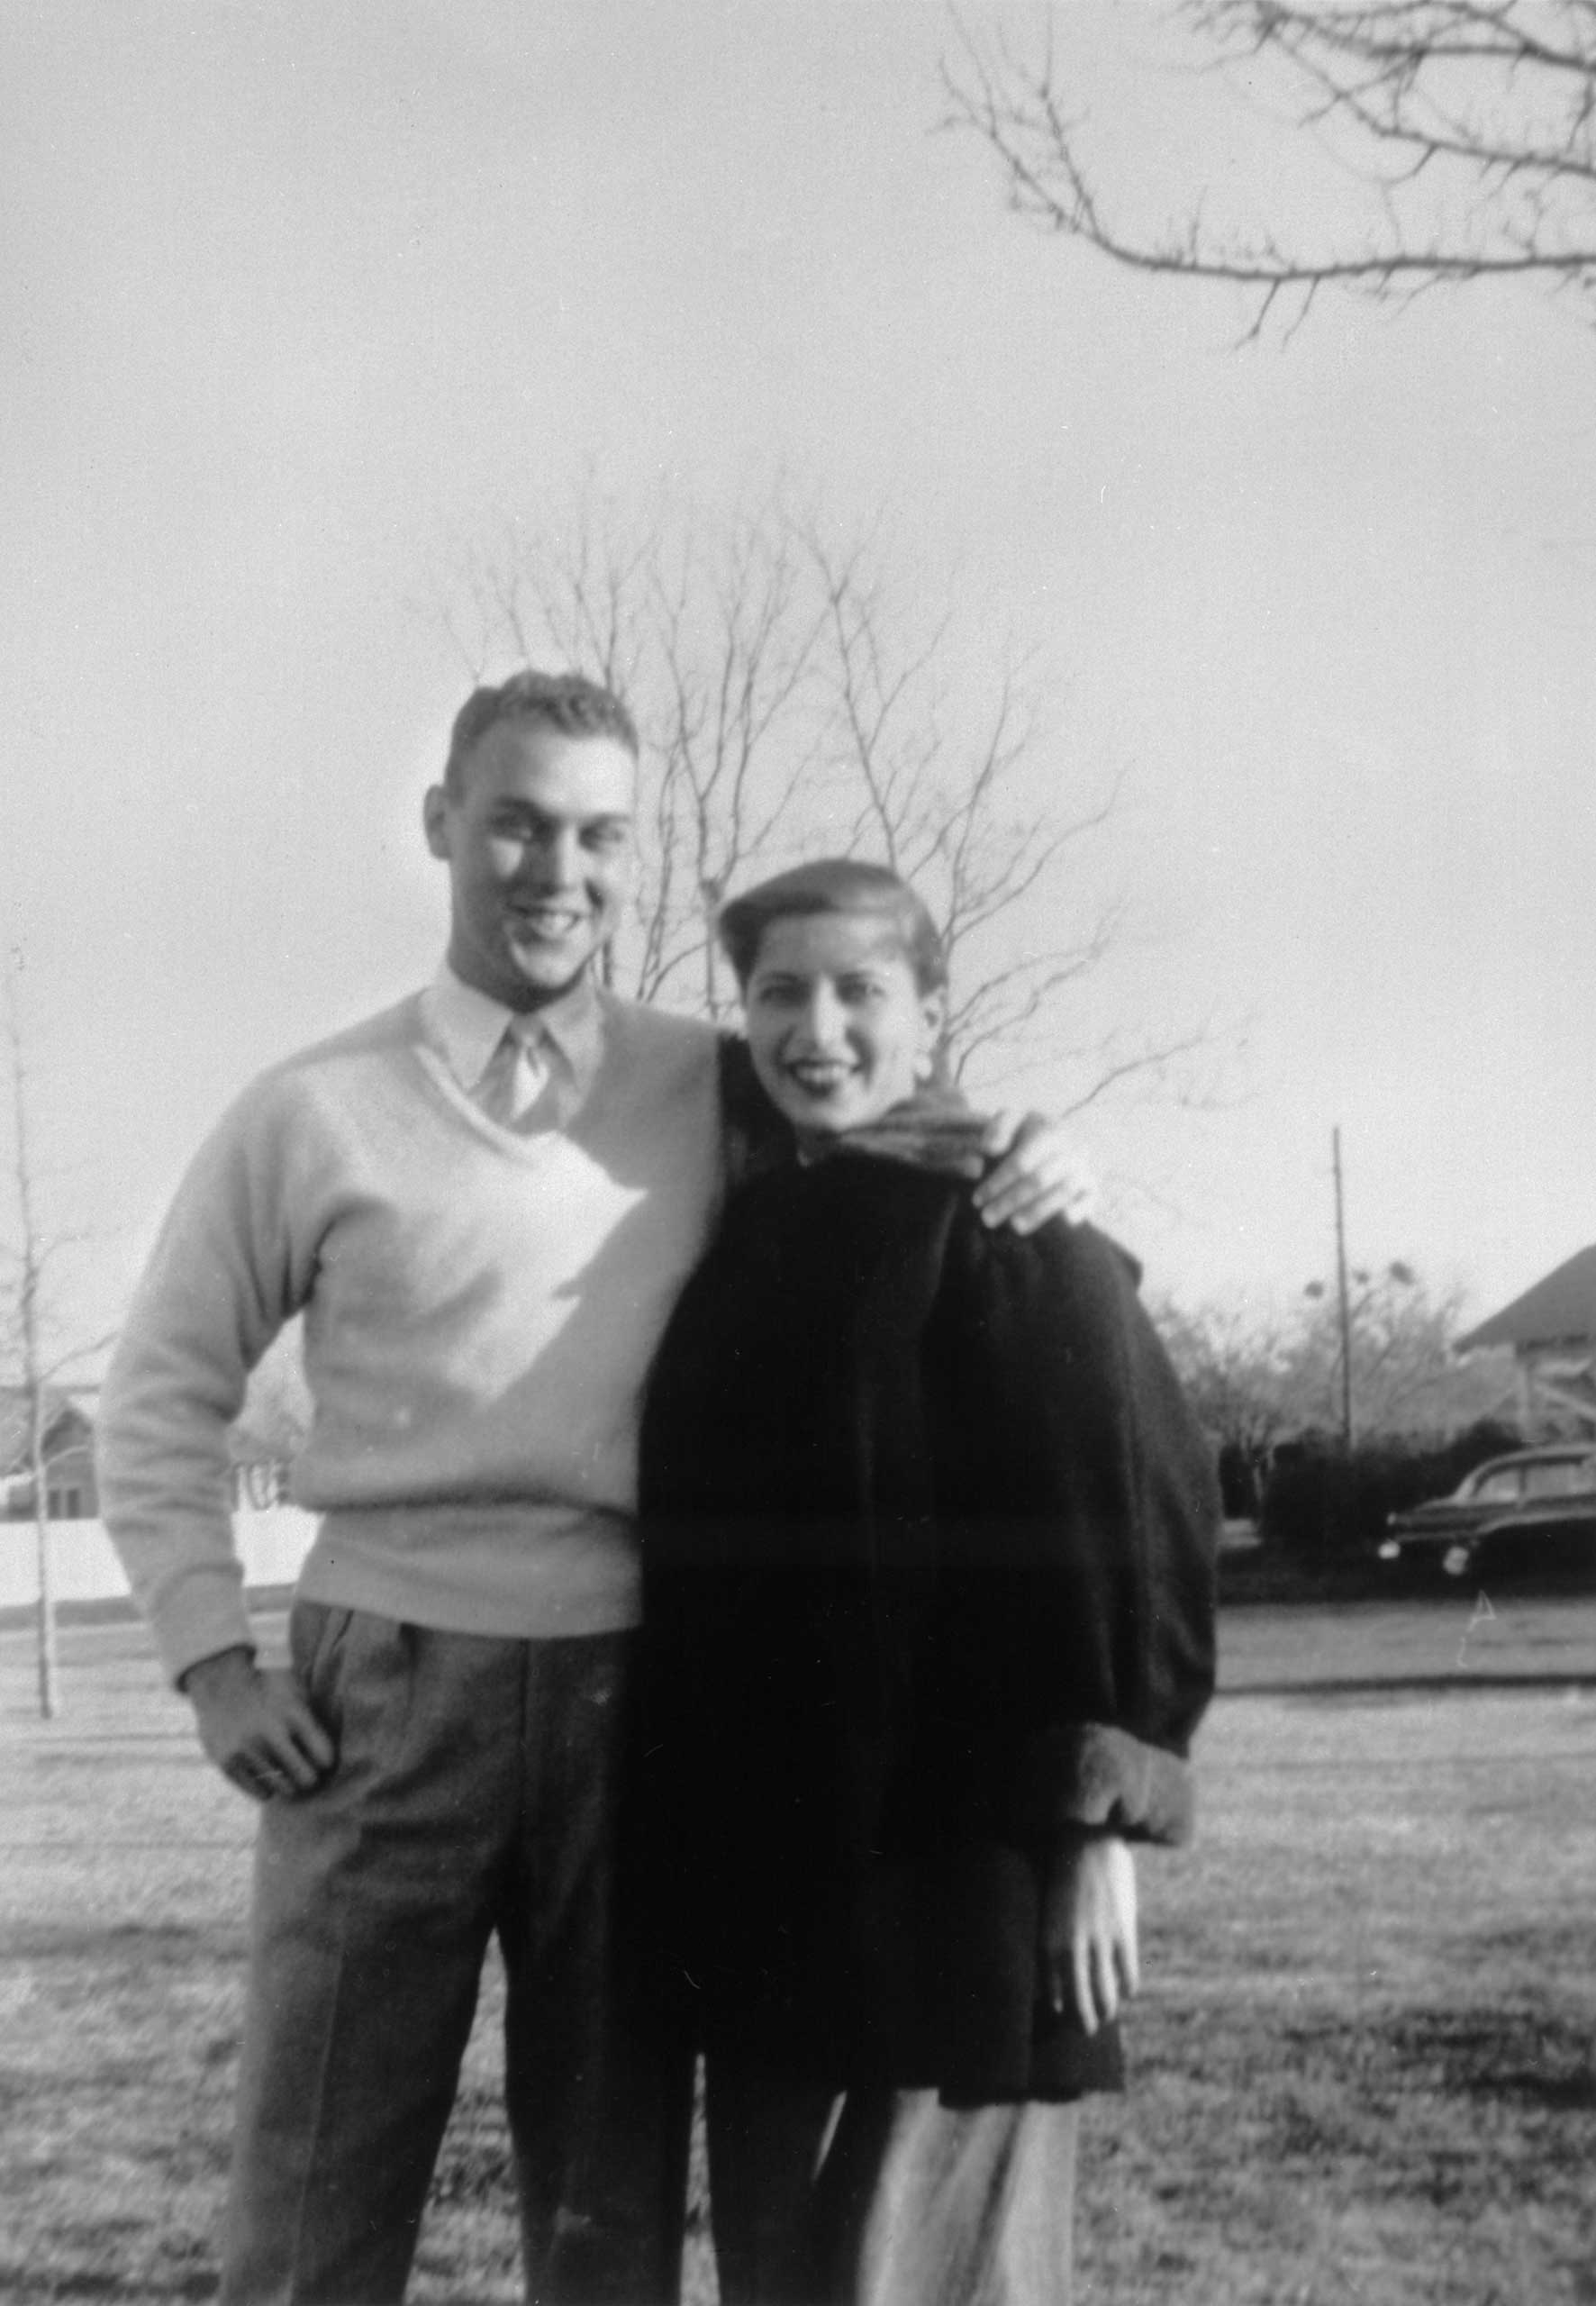 Fall, 1954
                              Martin D. Ginsburg and Ruth Bader Ginsburg taken in the fall while Martin Ginsburg served in the Army, before being drafted, stationed at Artillery Village in Fort Sill, Okla. Martin Ginsburg was drafted into the Army in 1954.